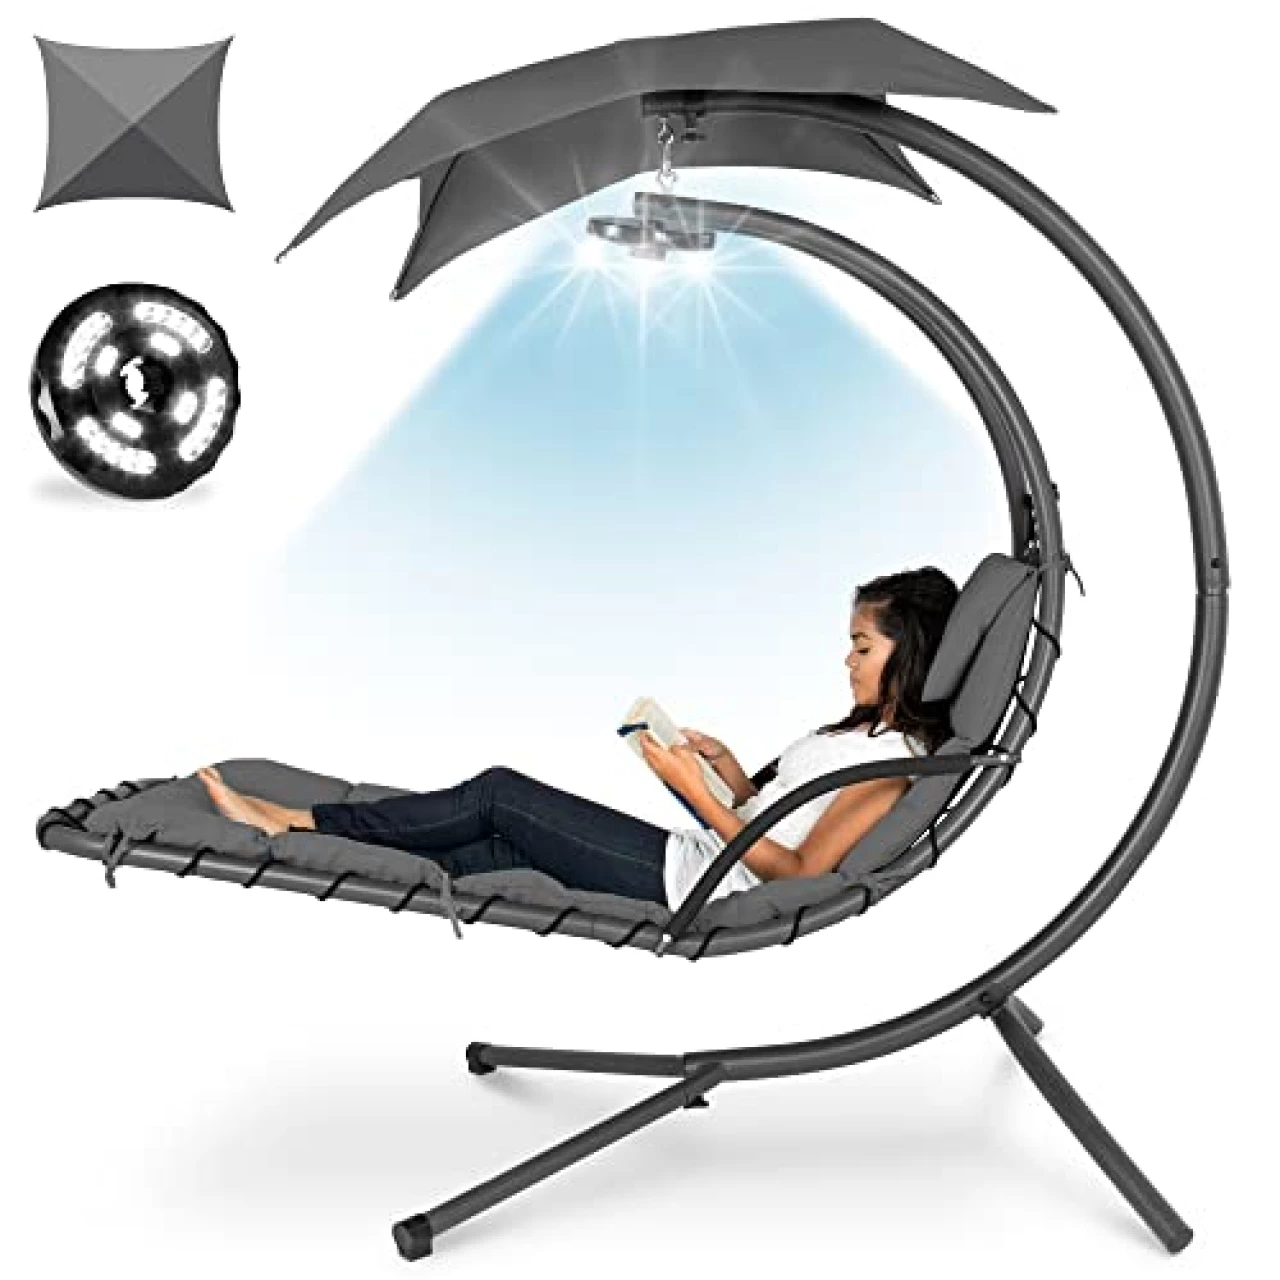 Best Choice Products Hanging LED-Lit Curved Chaise Lounge Chair Swing